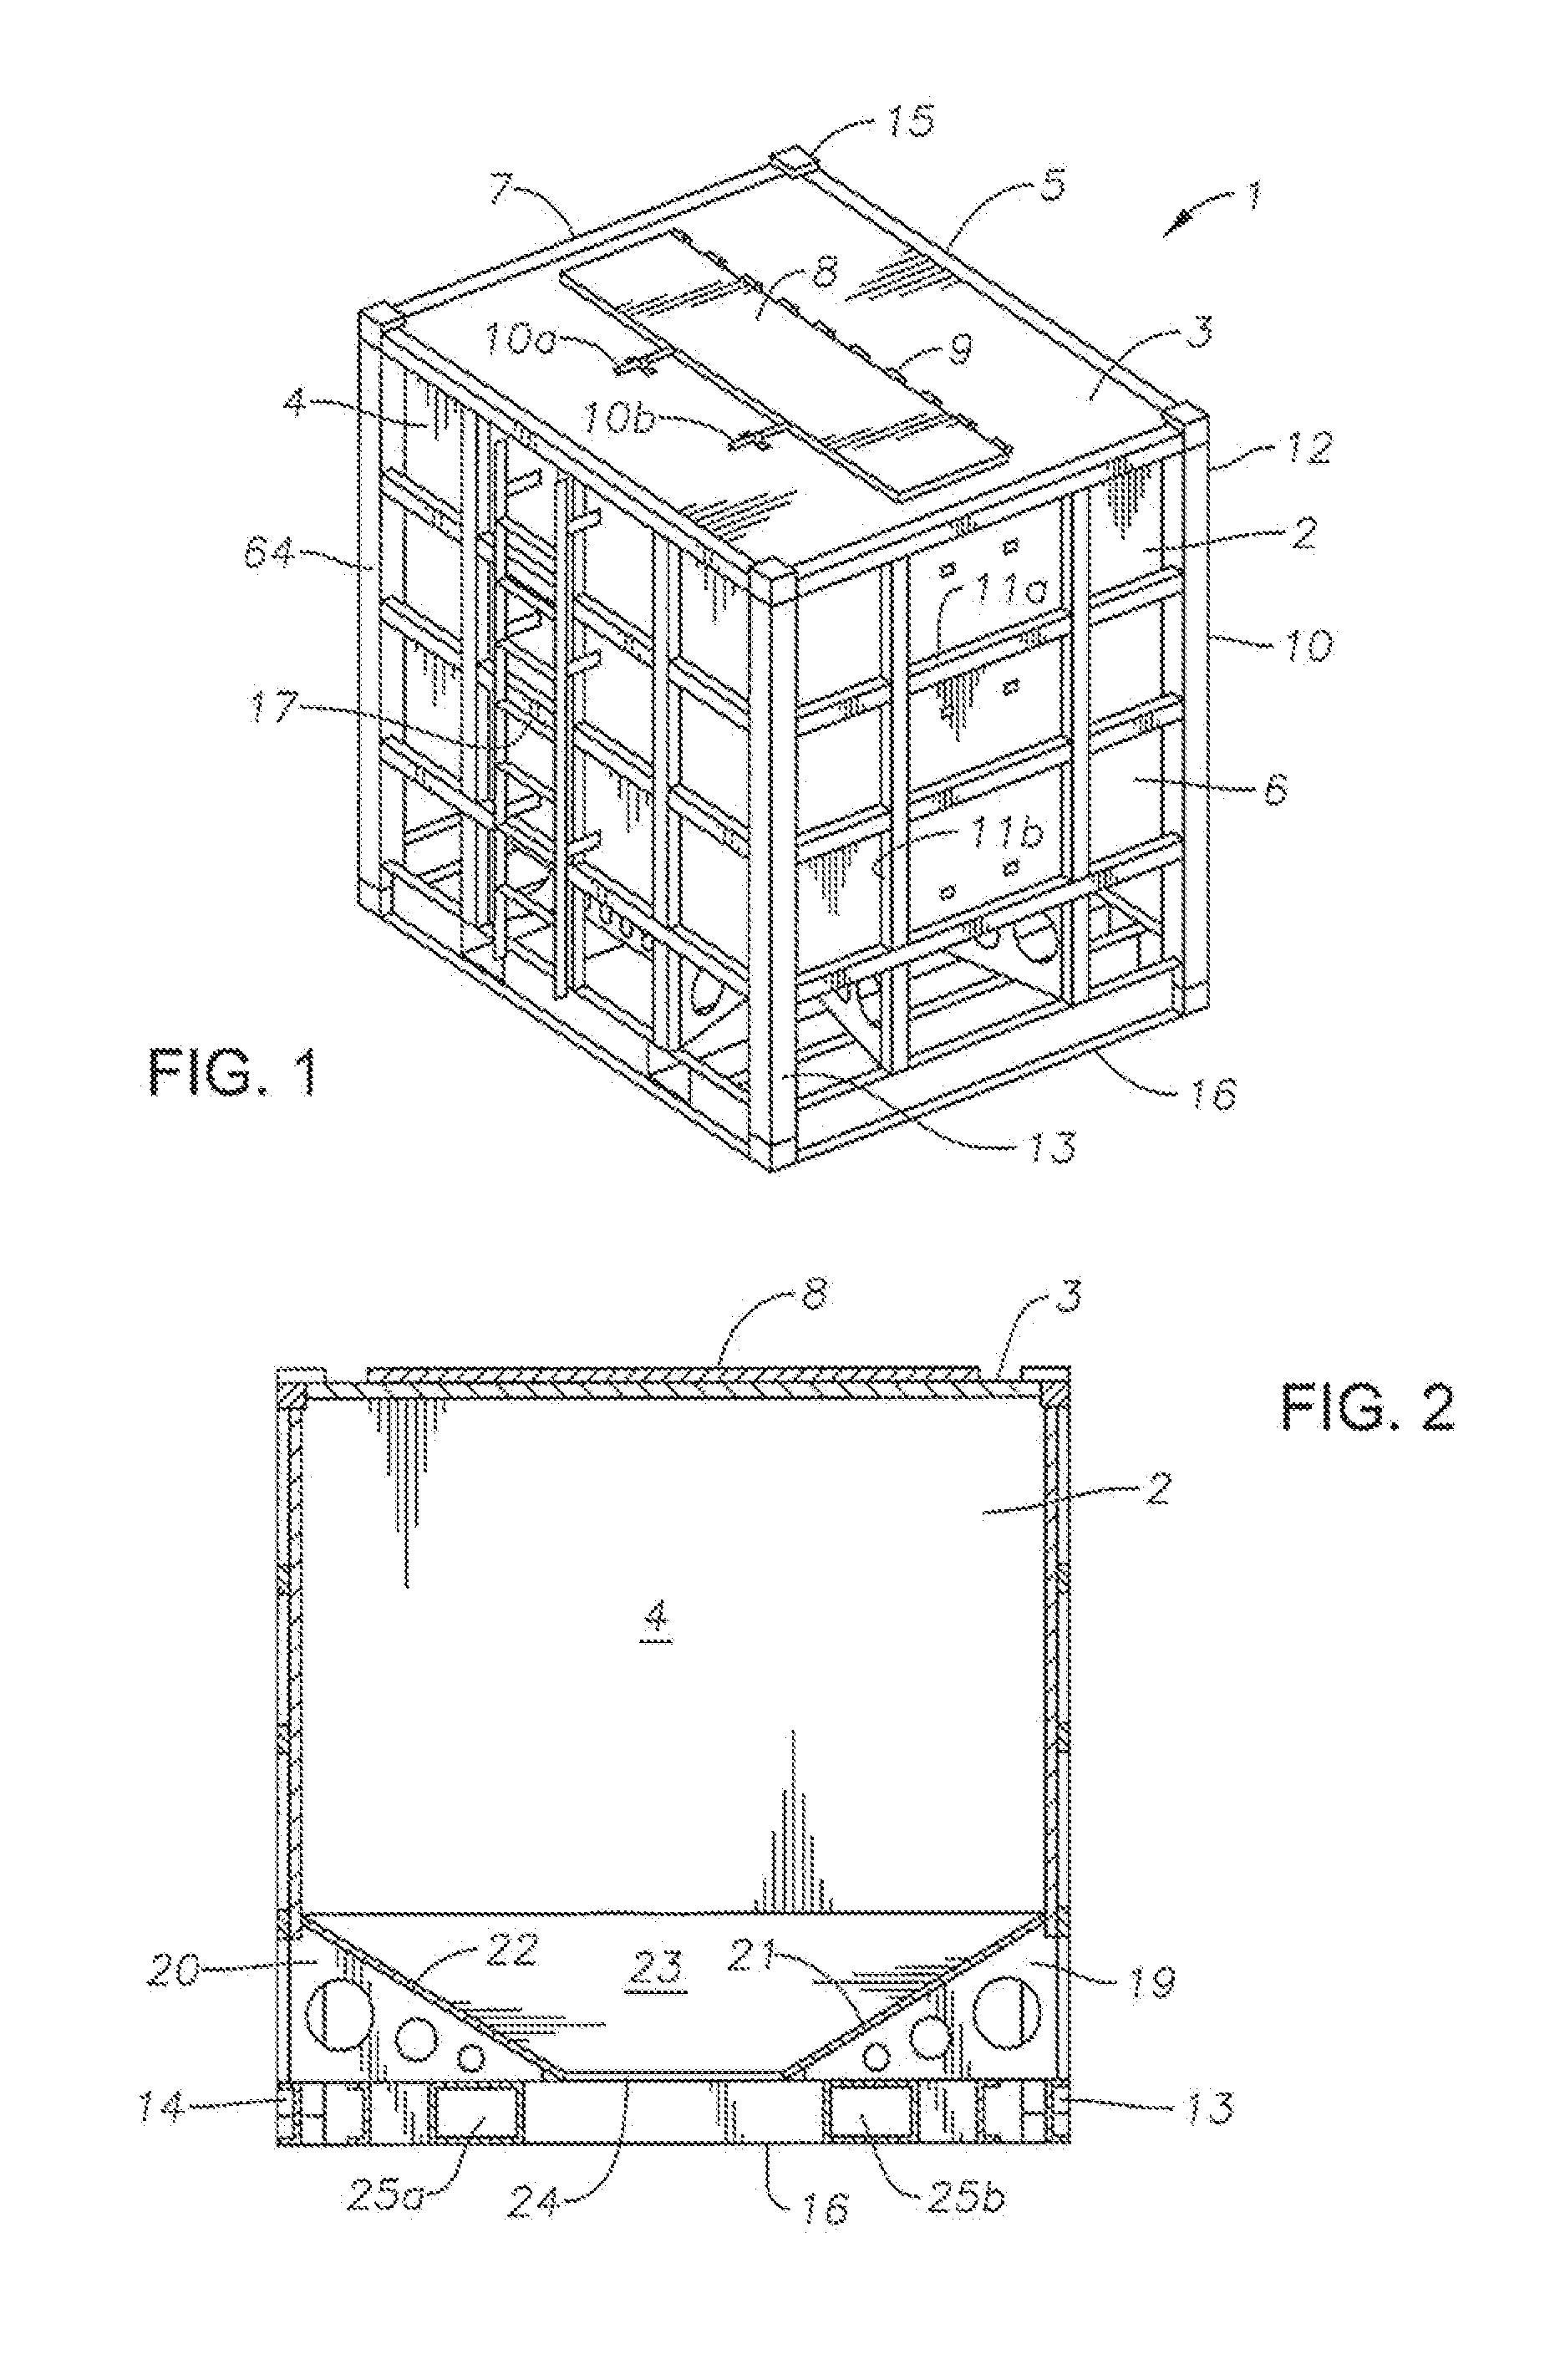 Apparatus for the transport and storage of proppant